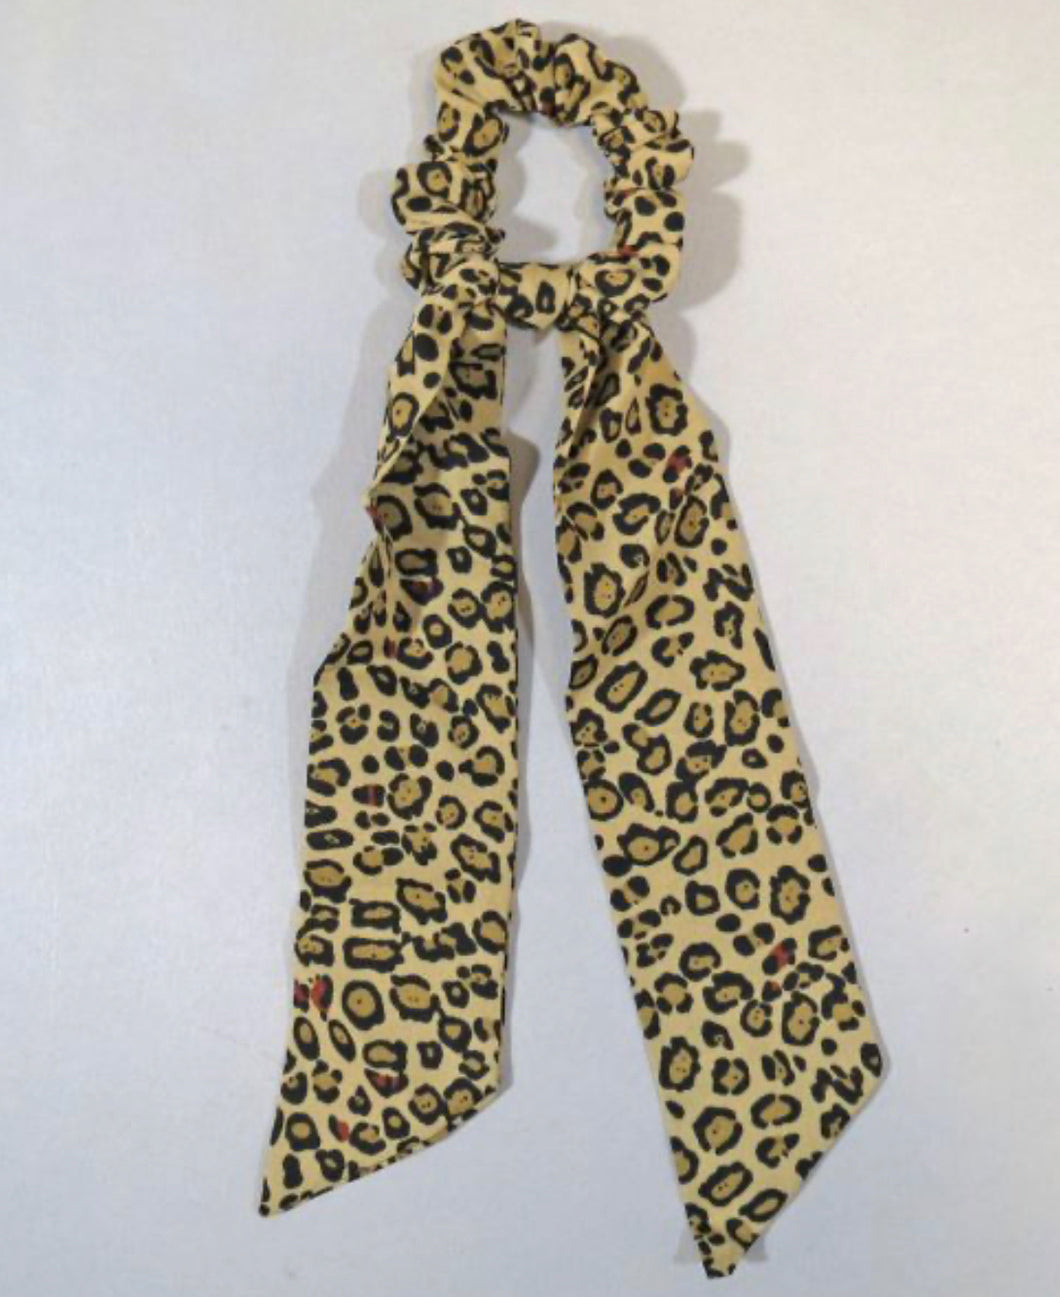 Leopard Ponytail Holder with Ties